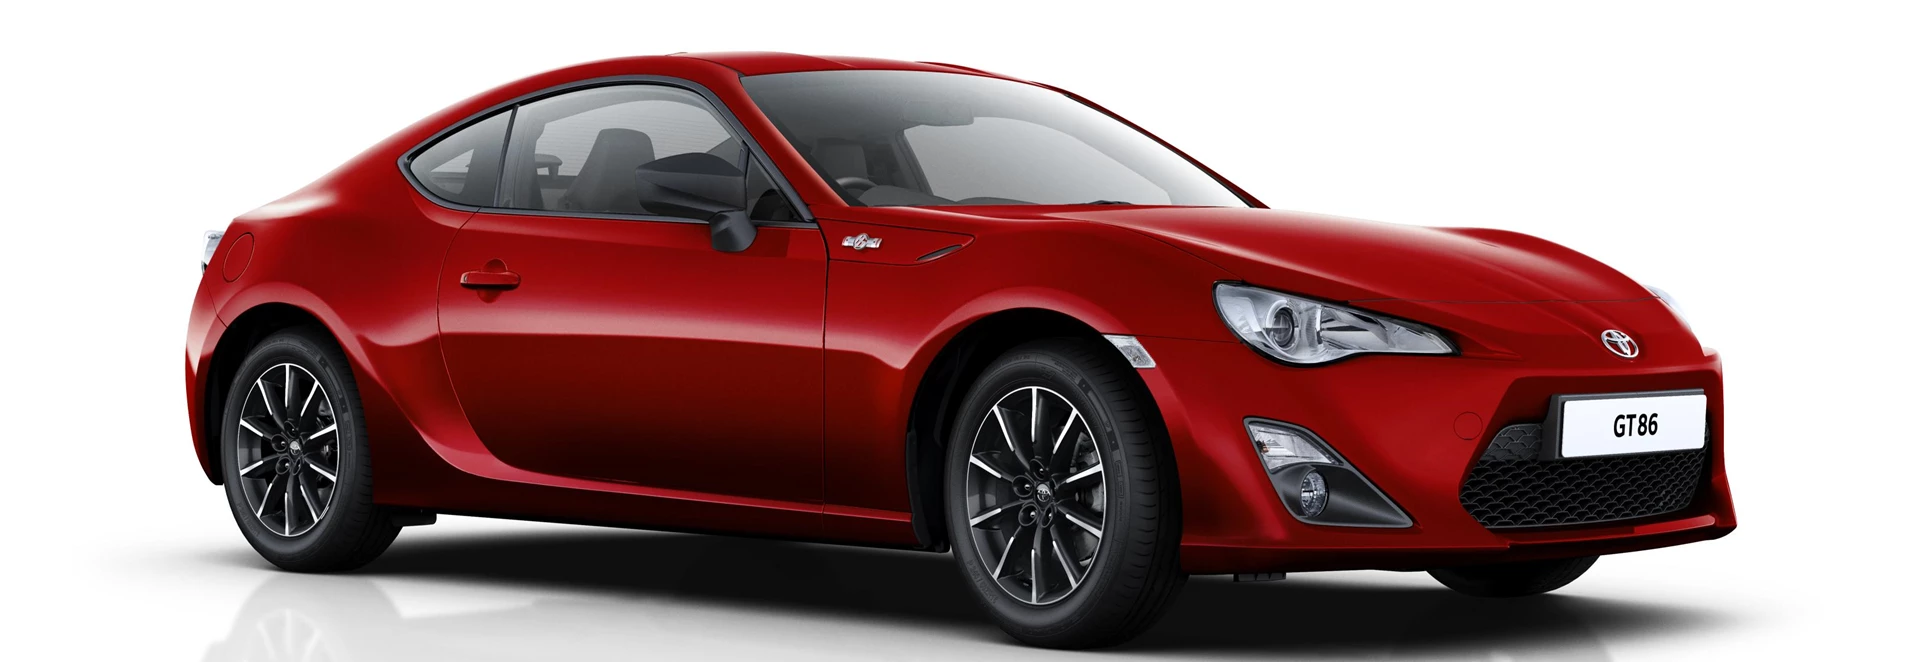 Toyota cuts GT86 price to £22,195 